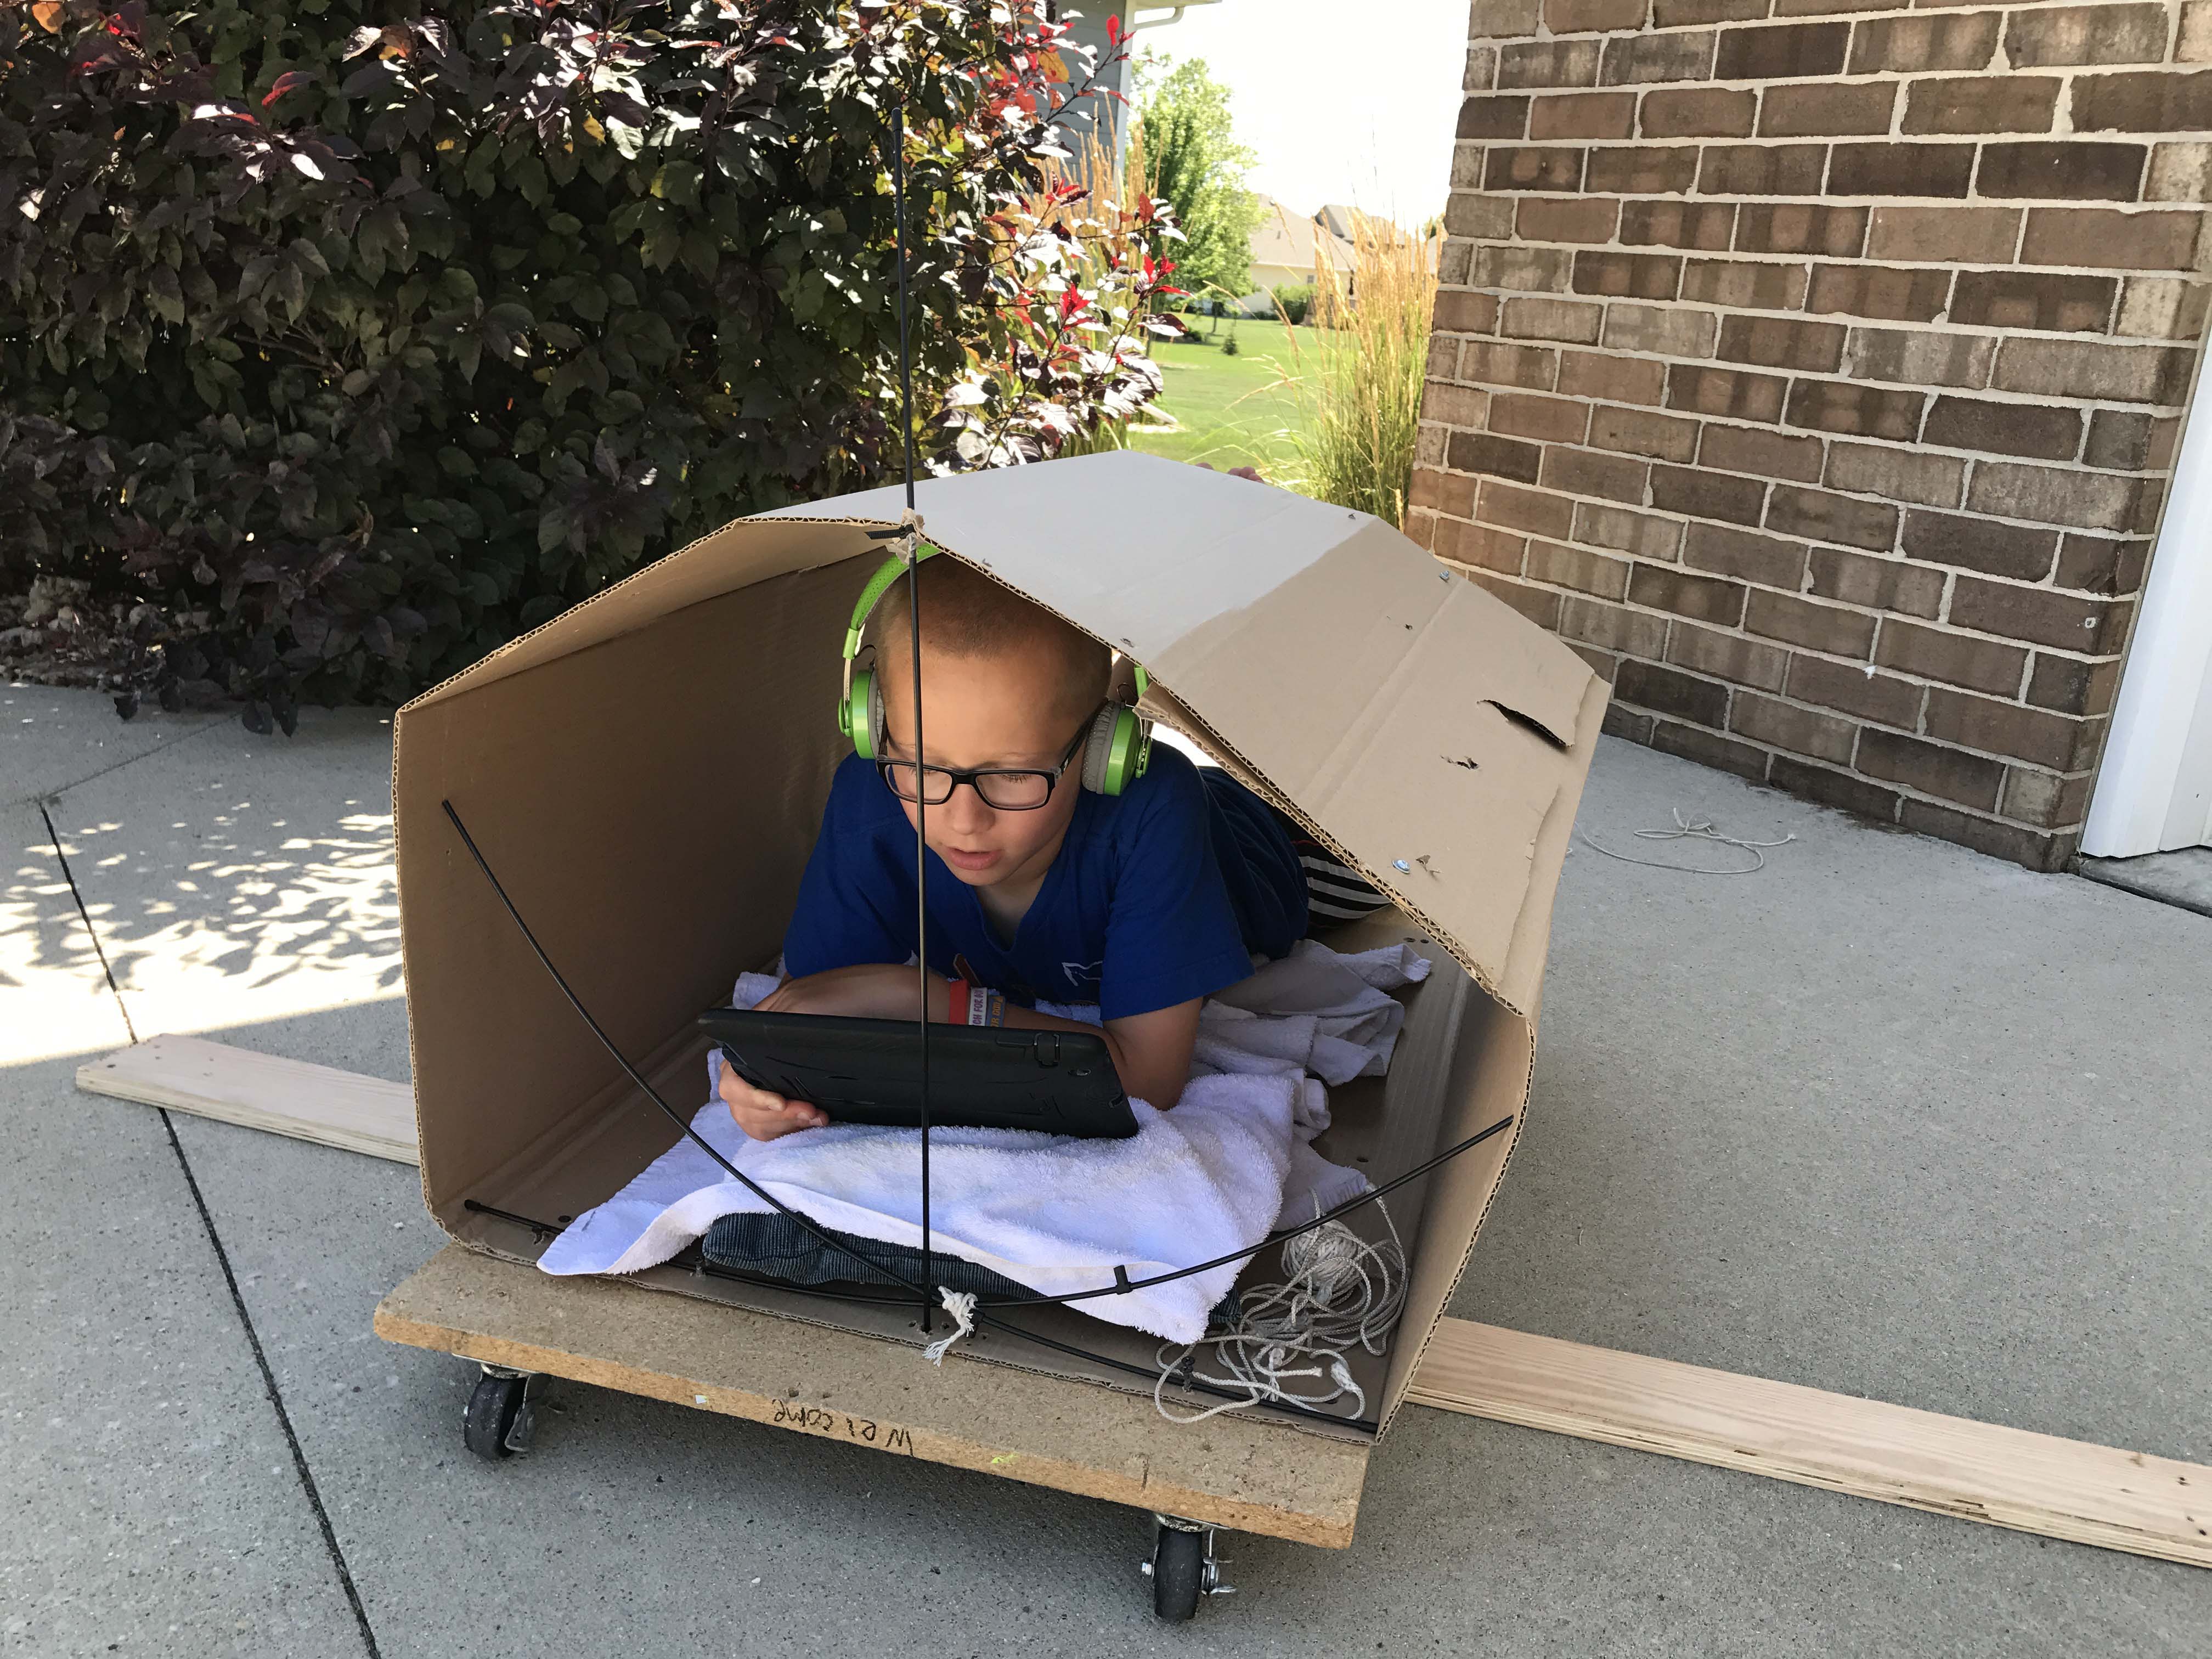 Dyslexic student ear reading in a fort he built outside on a summer's day.